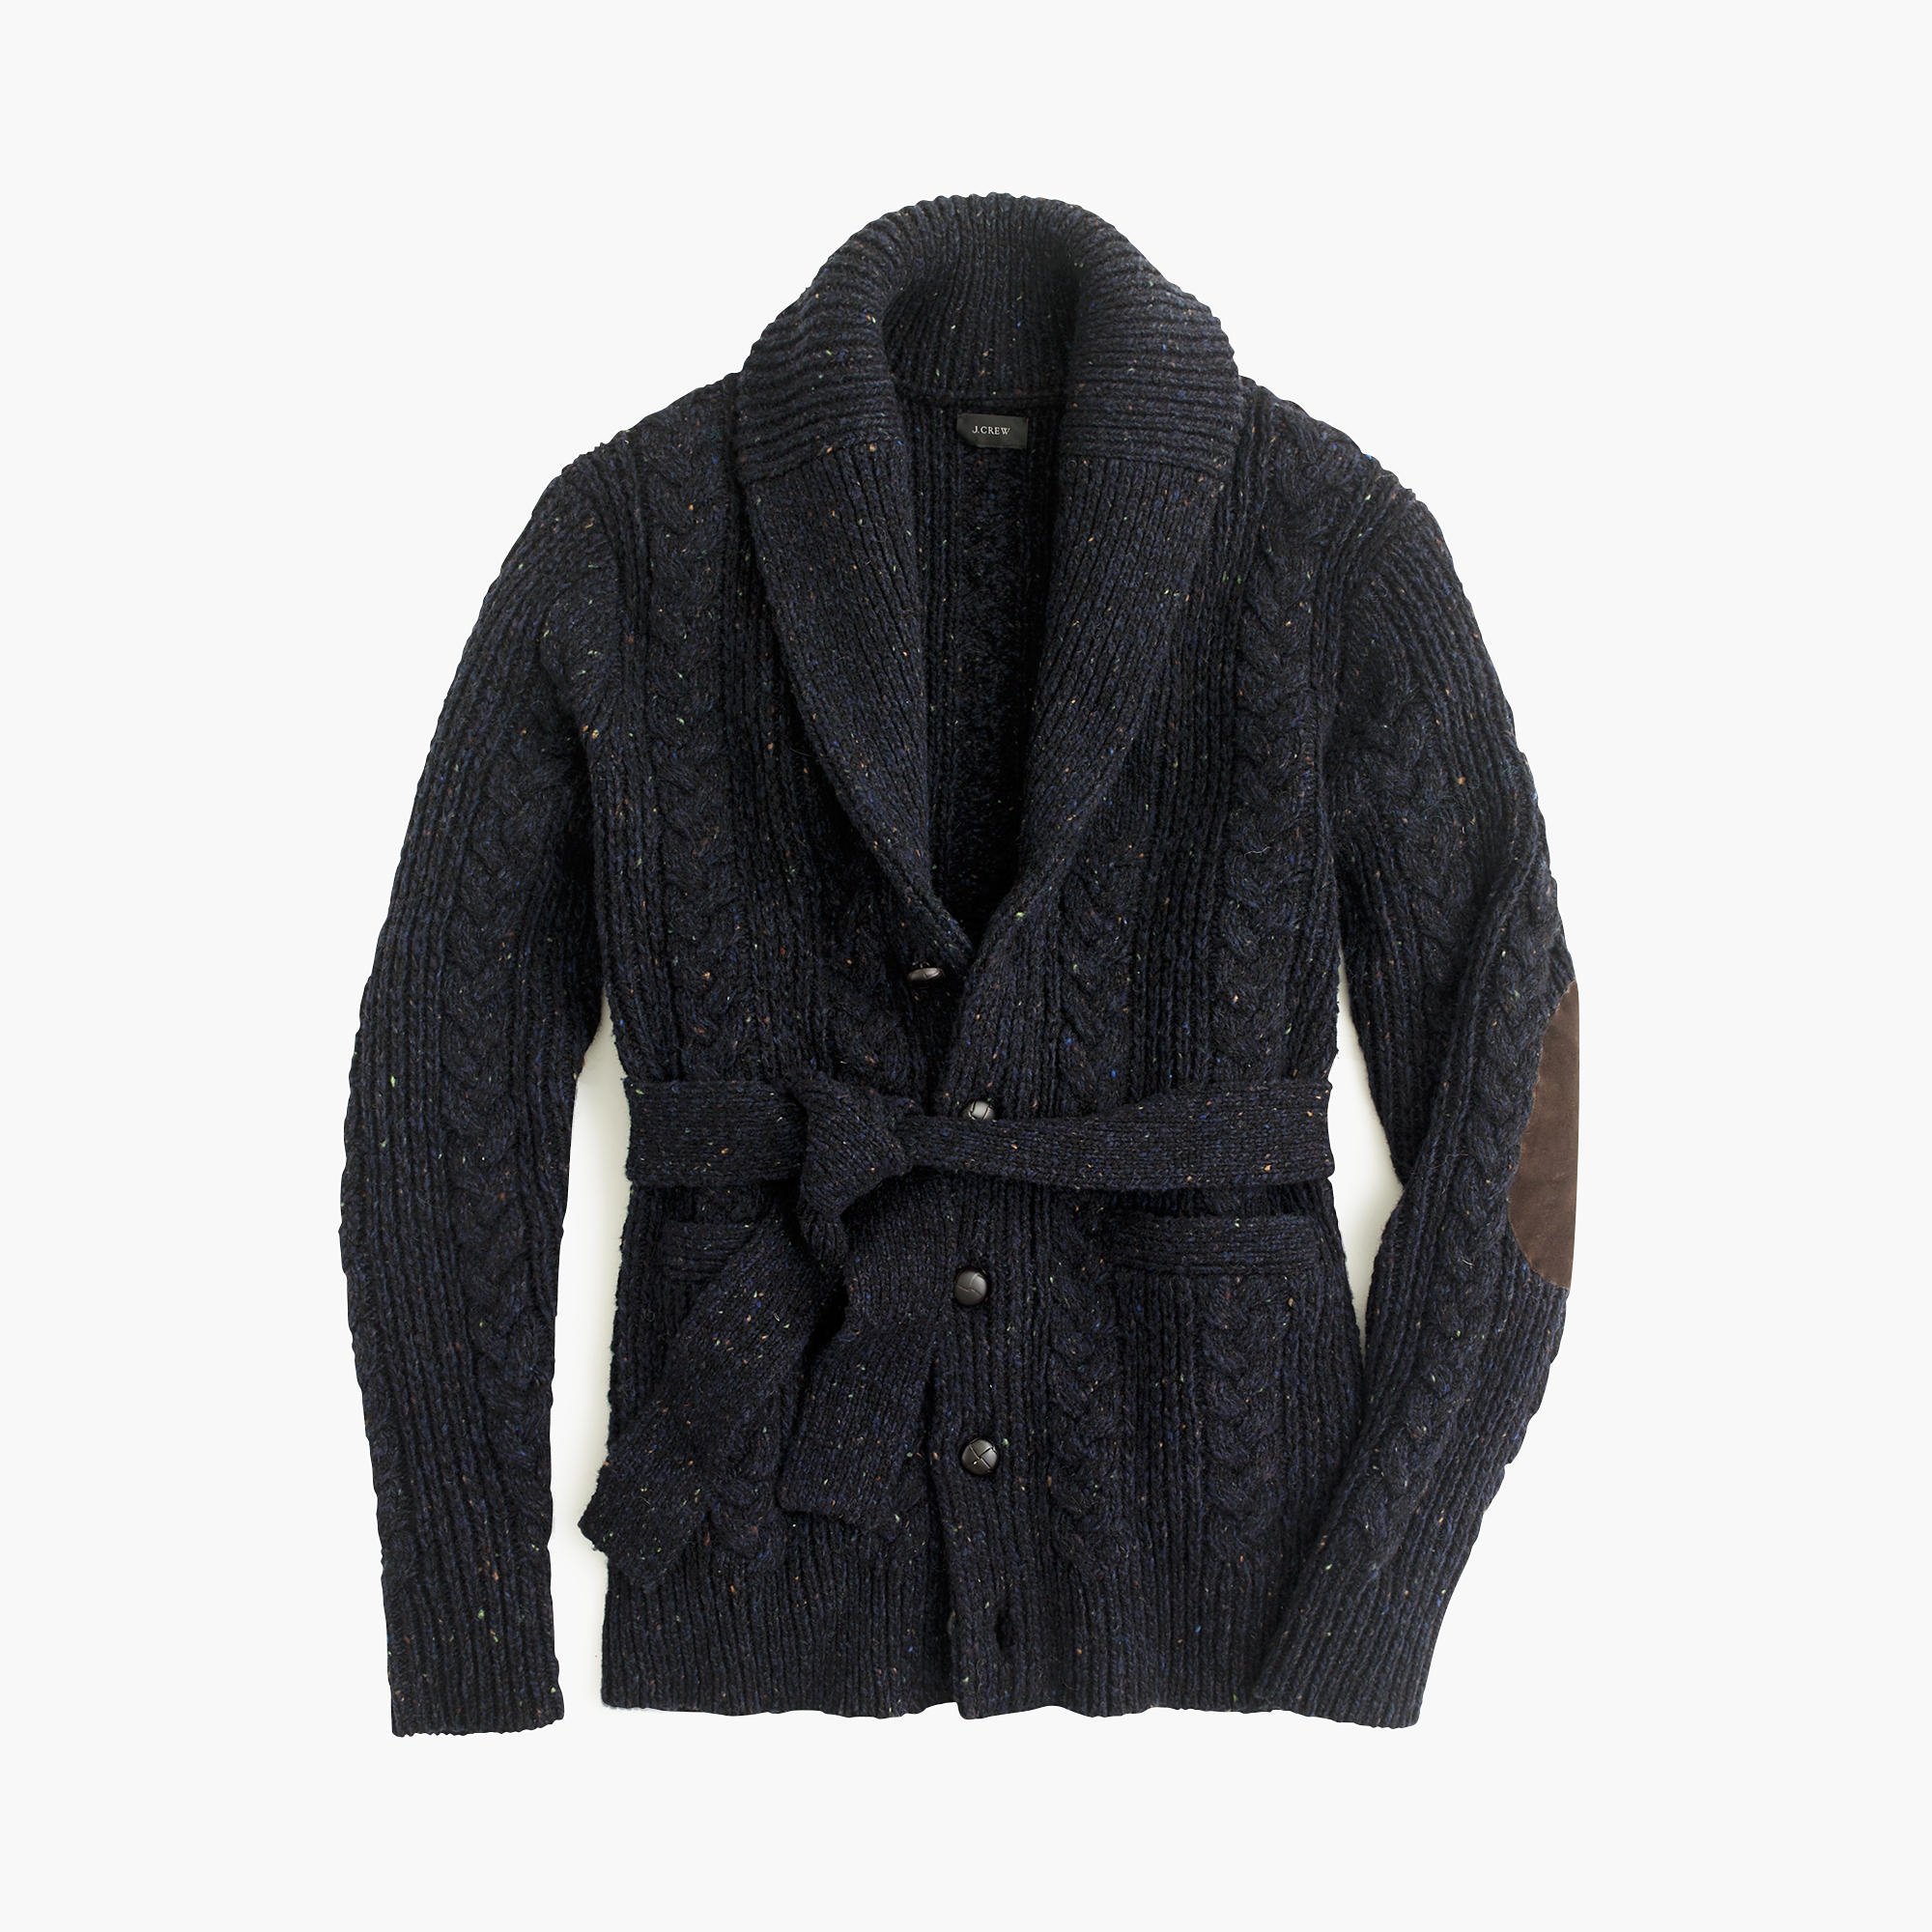 Lyst - J.Crew Donegal Wool Belted Shawl Cardigan Sweater in Blue for Men